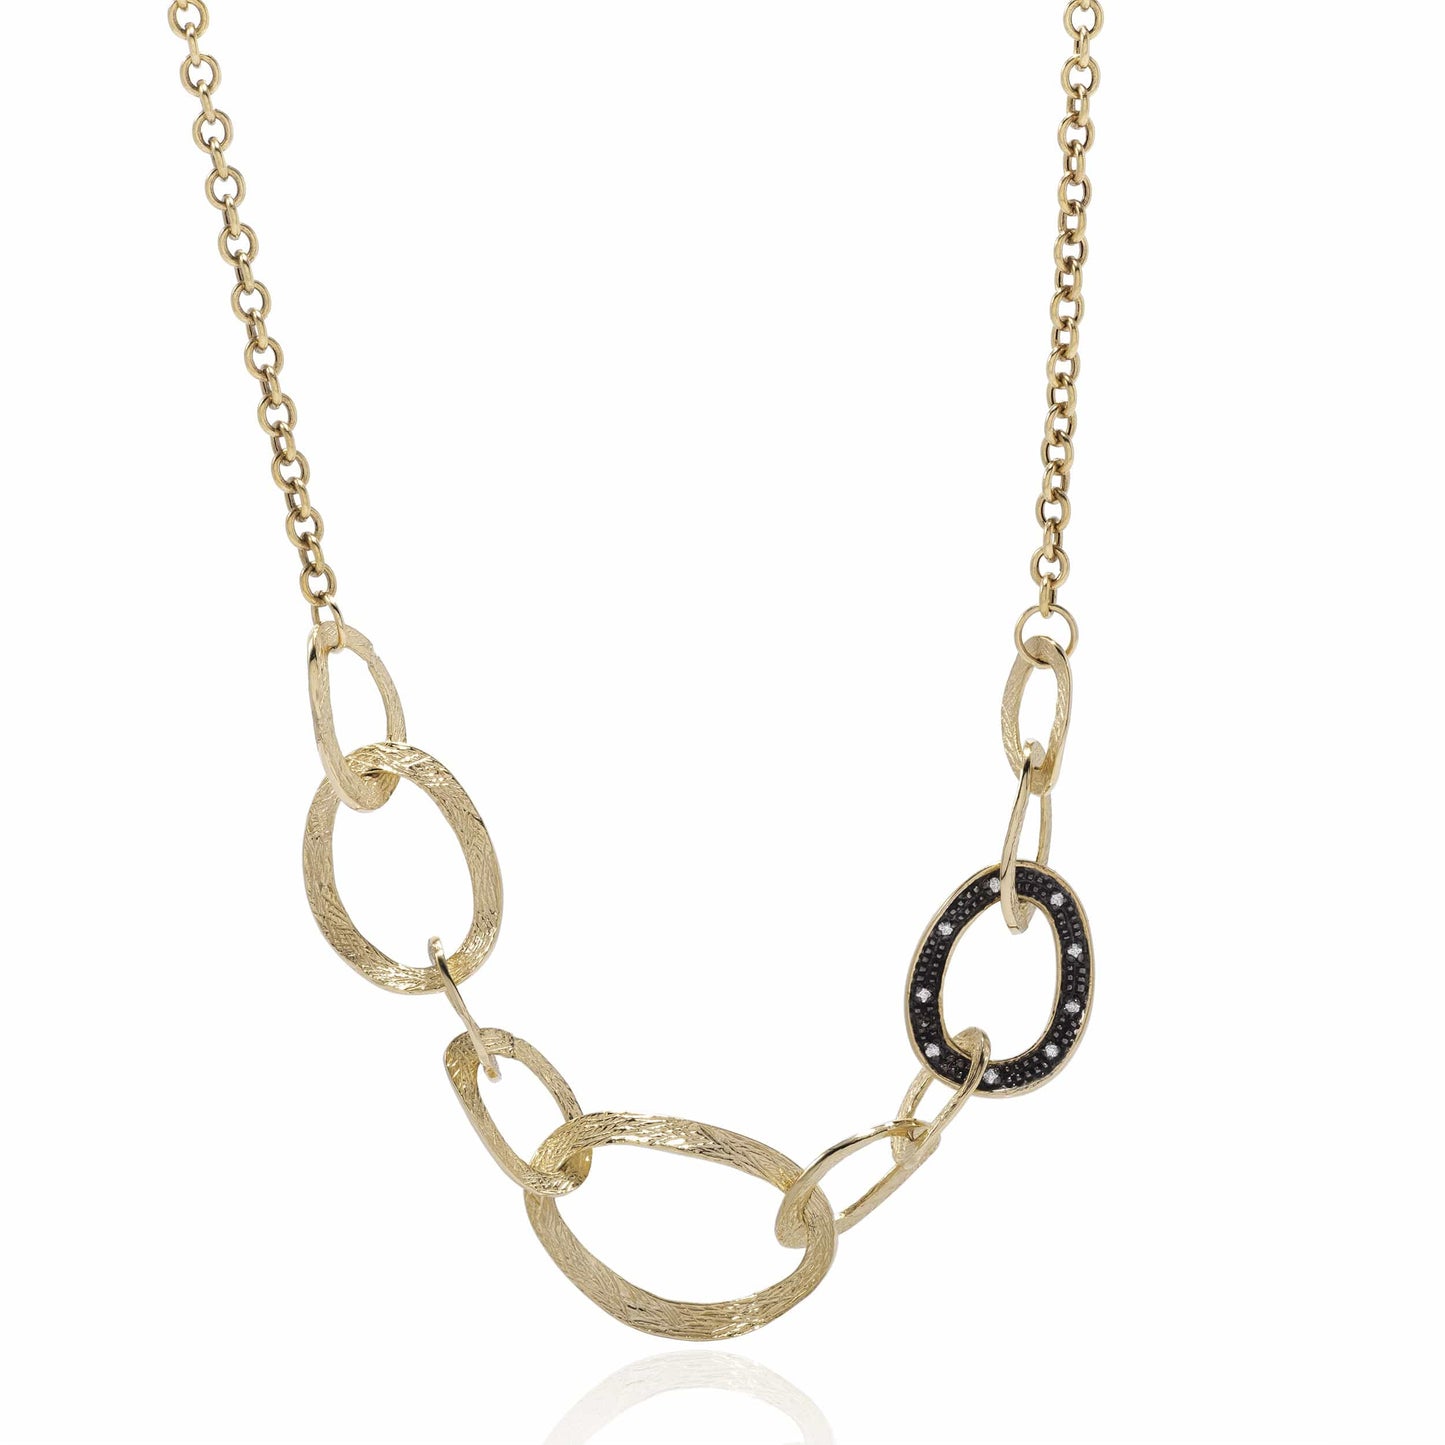 Dalia T Online Necklace Soft Links Collection 14KT Yellow Gold & Diamonds Large Links Necklace with Black Rhodium